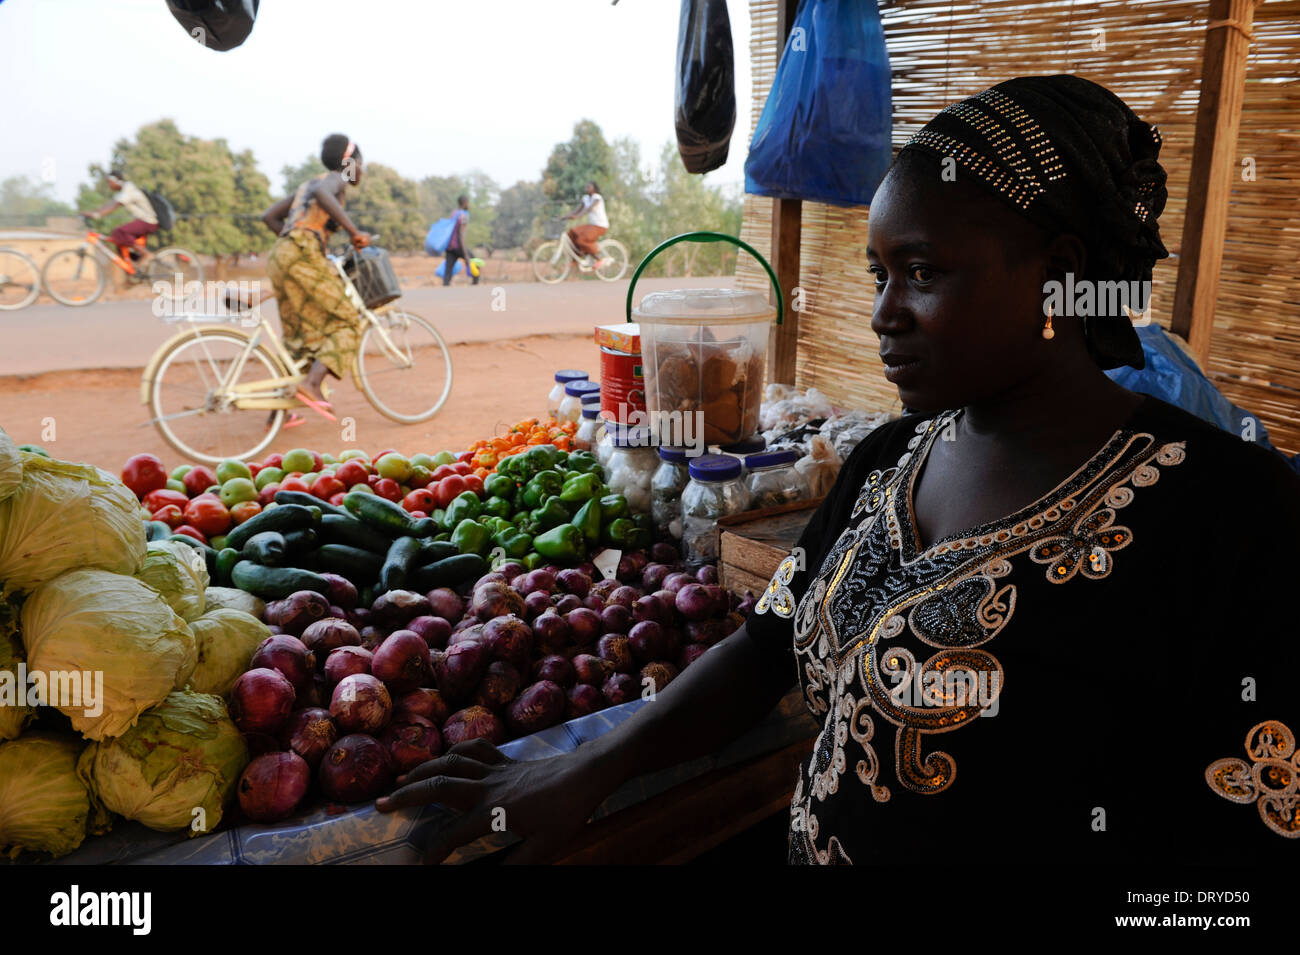 BURKINA FASO Kaya, diocese bank gives micro loan for women for income generation, women grow and sell vegetables directly at market Stock Photo